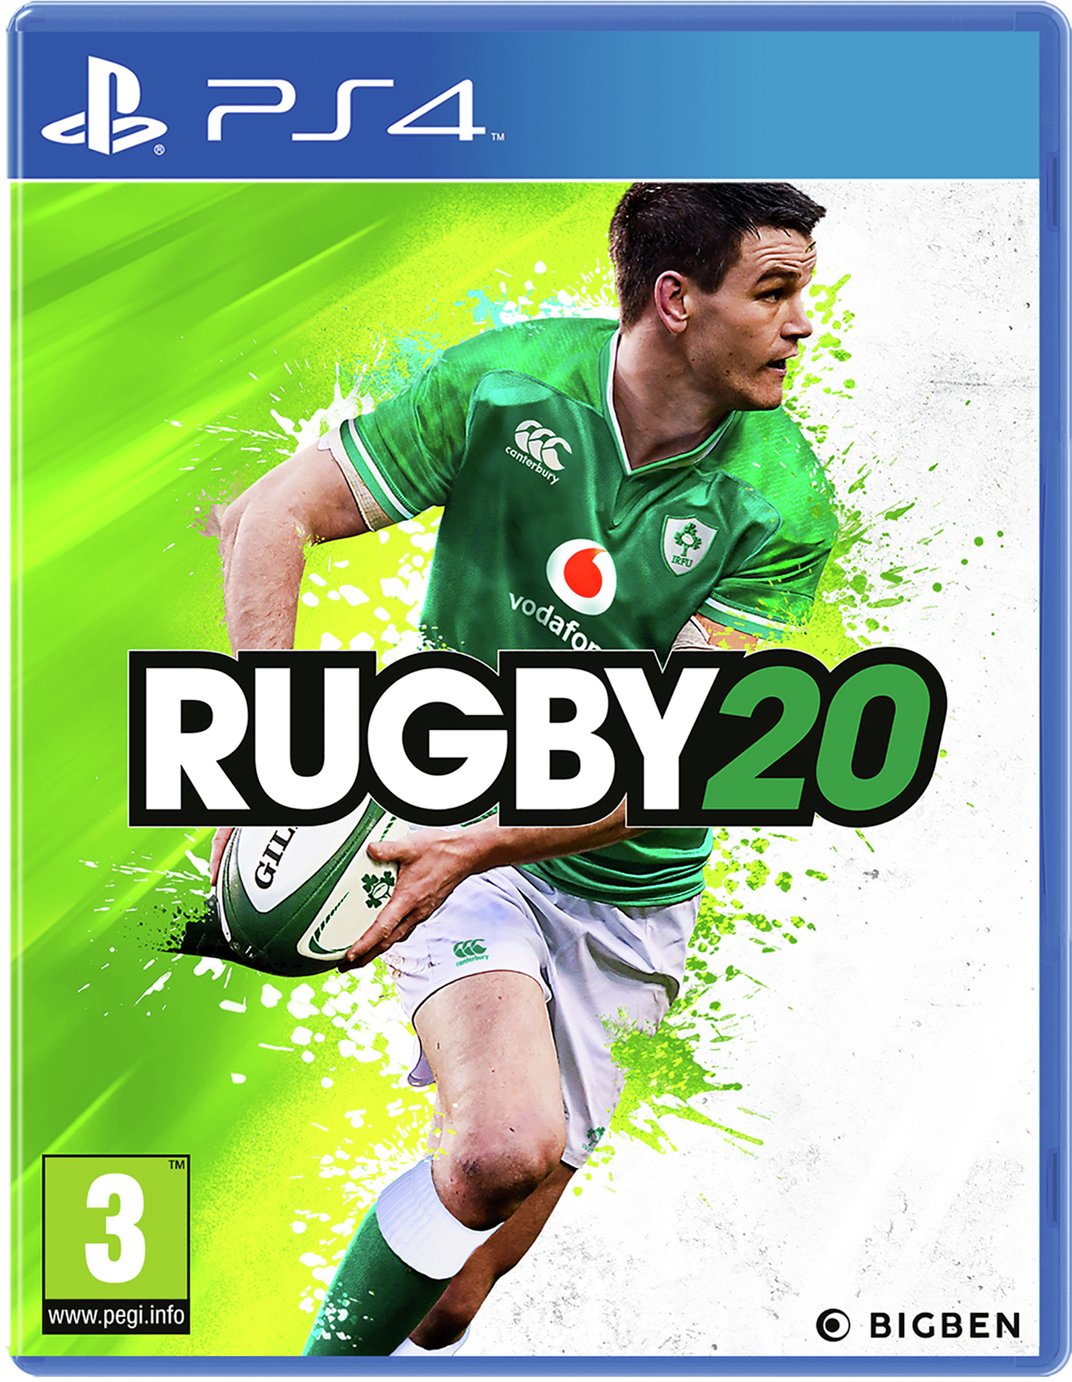 Rugby 20 (PS4), Eko Software